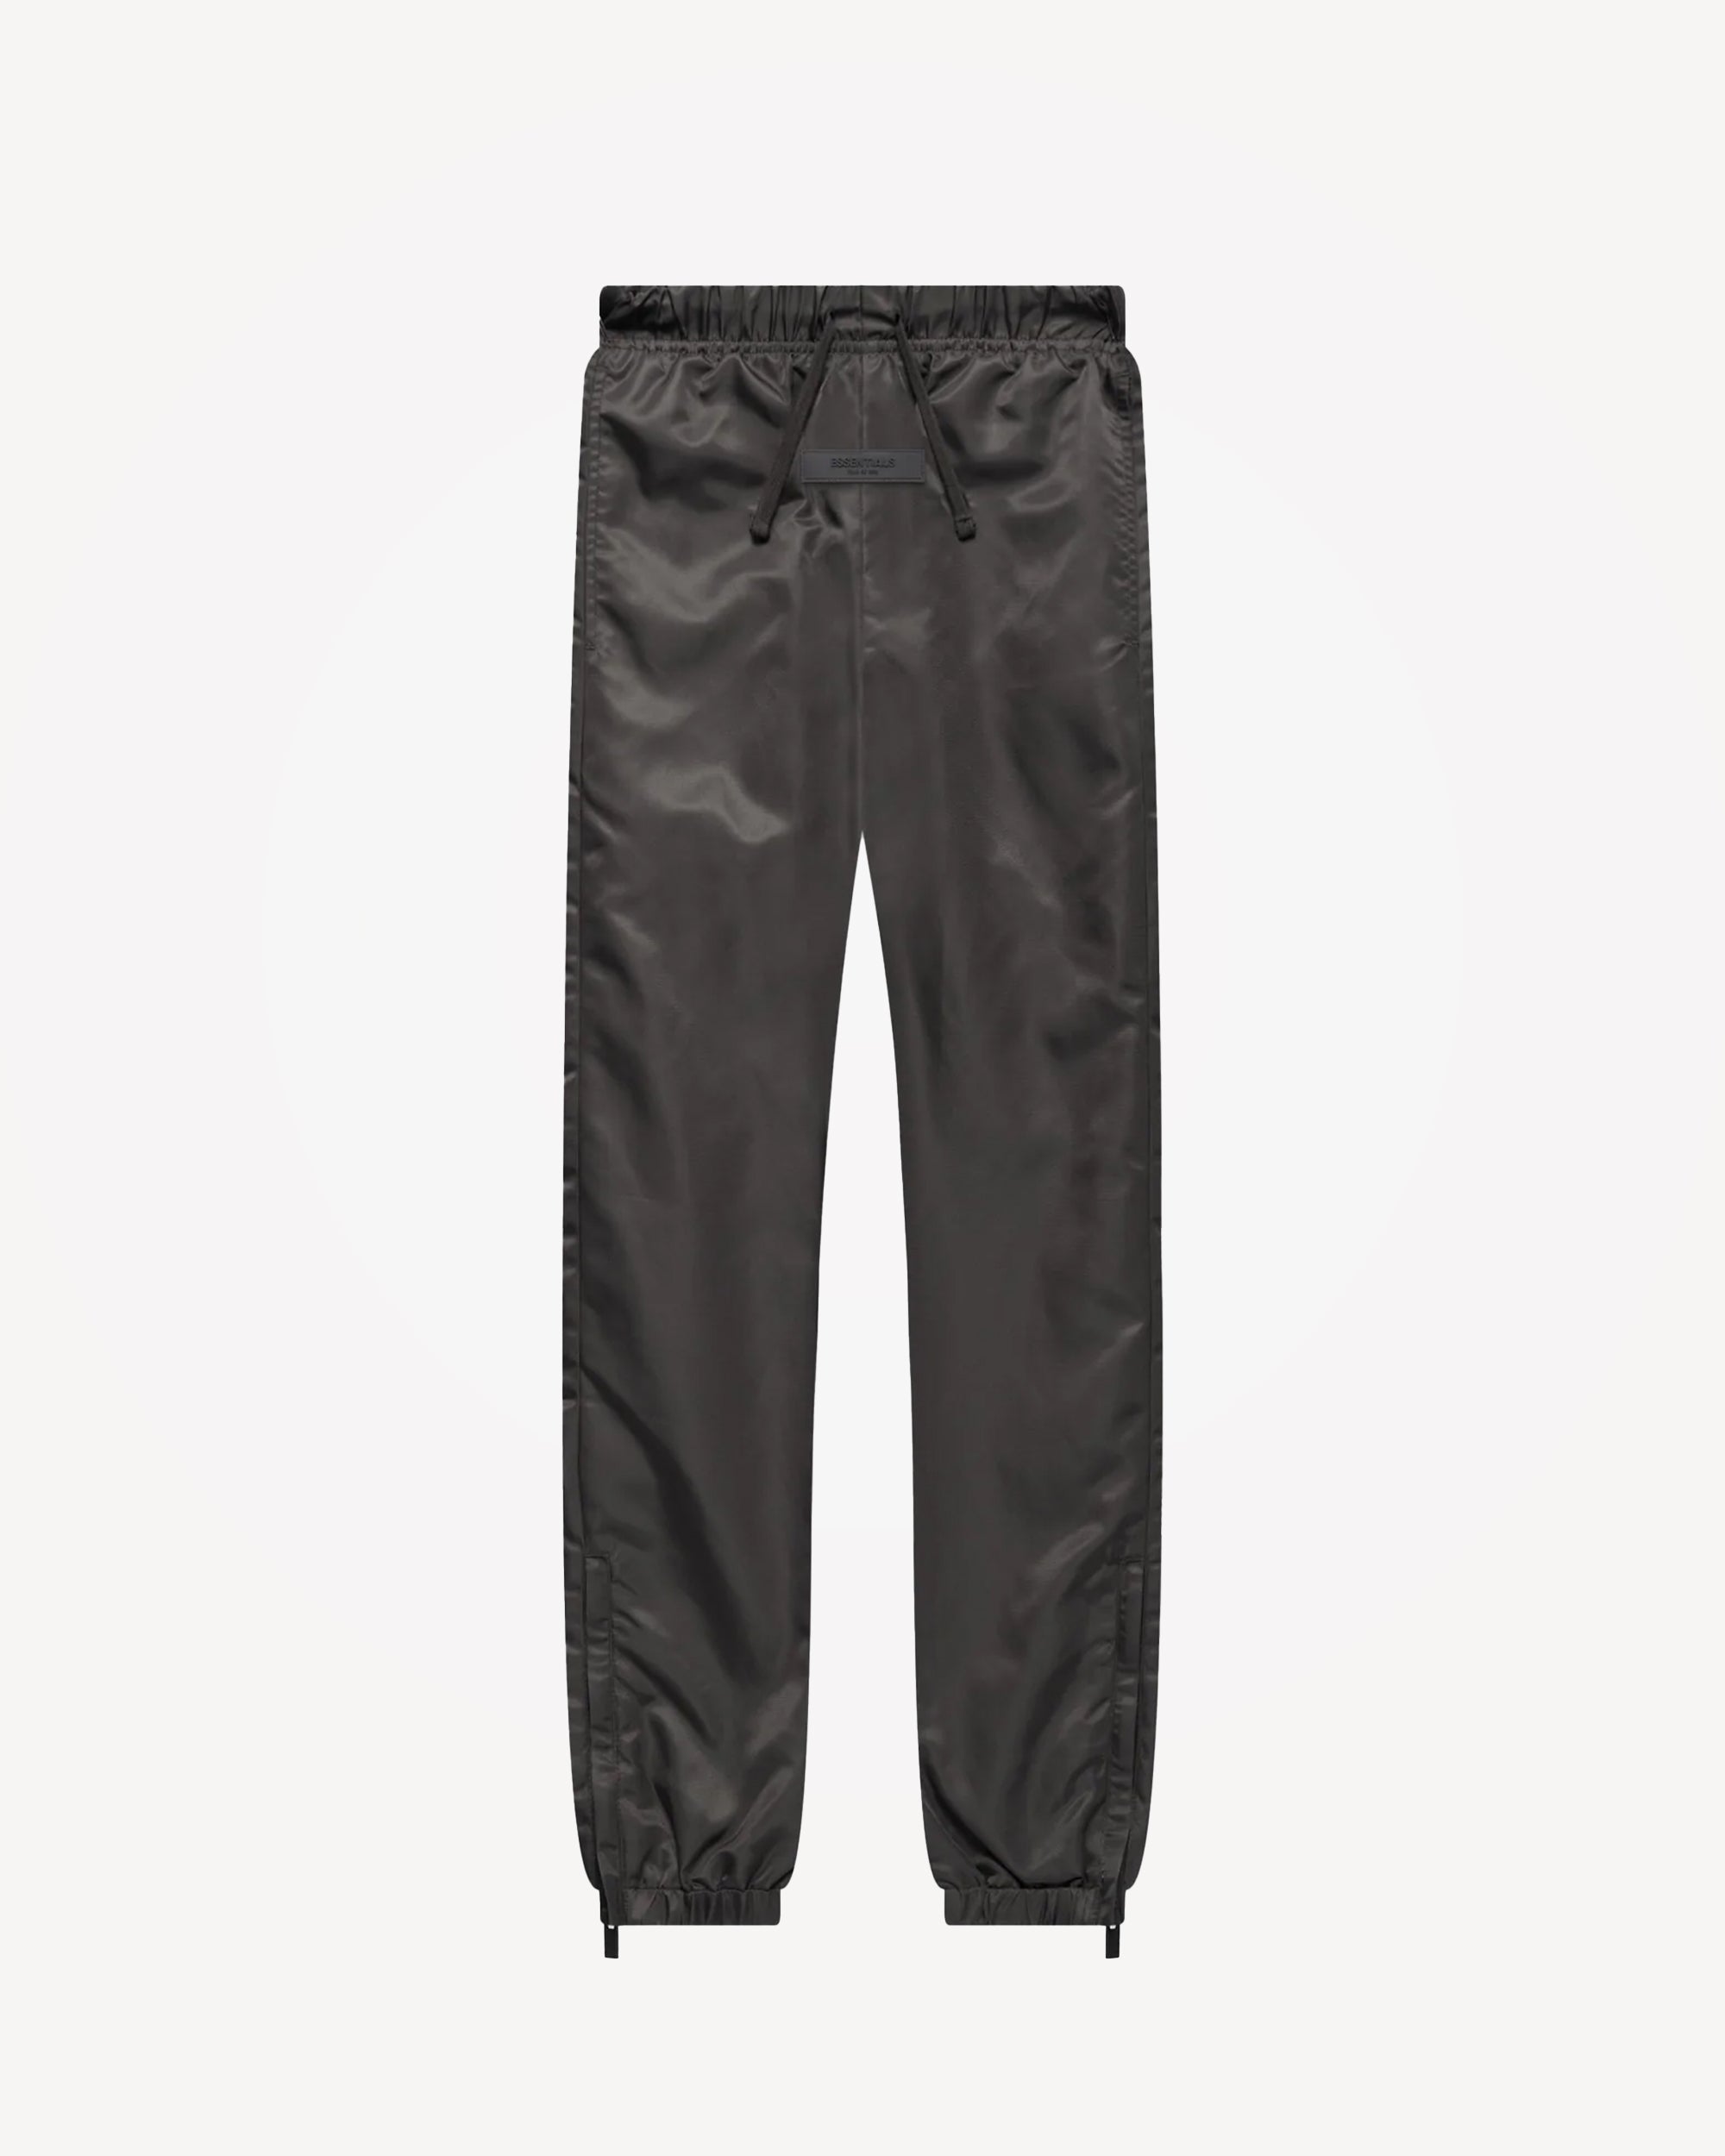 Kids' Track Pant in Iron